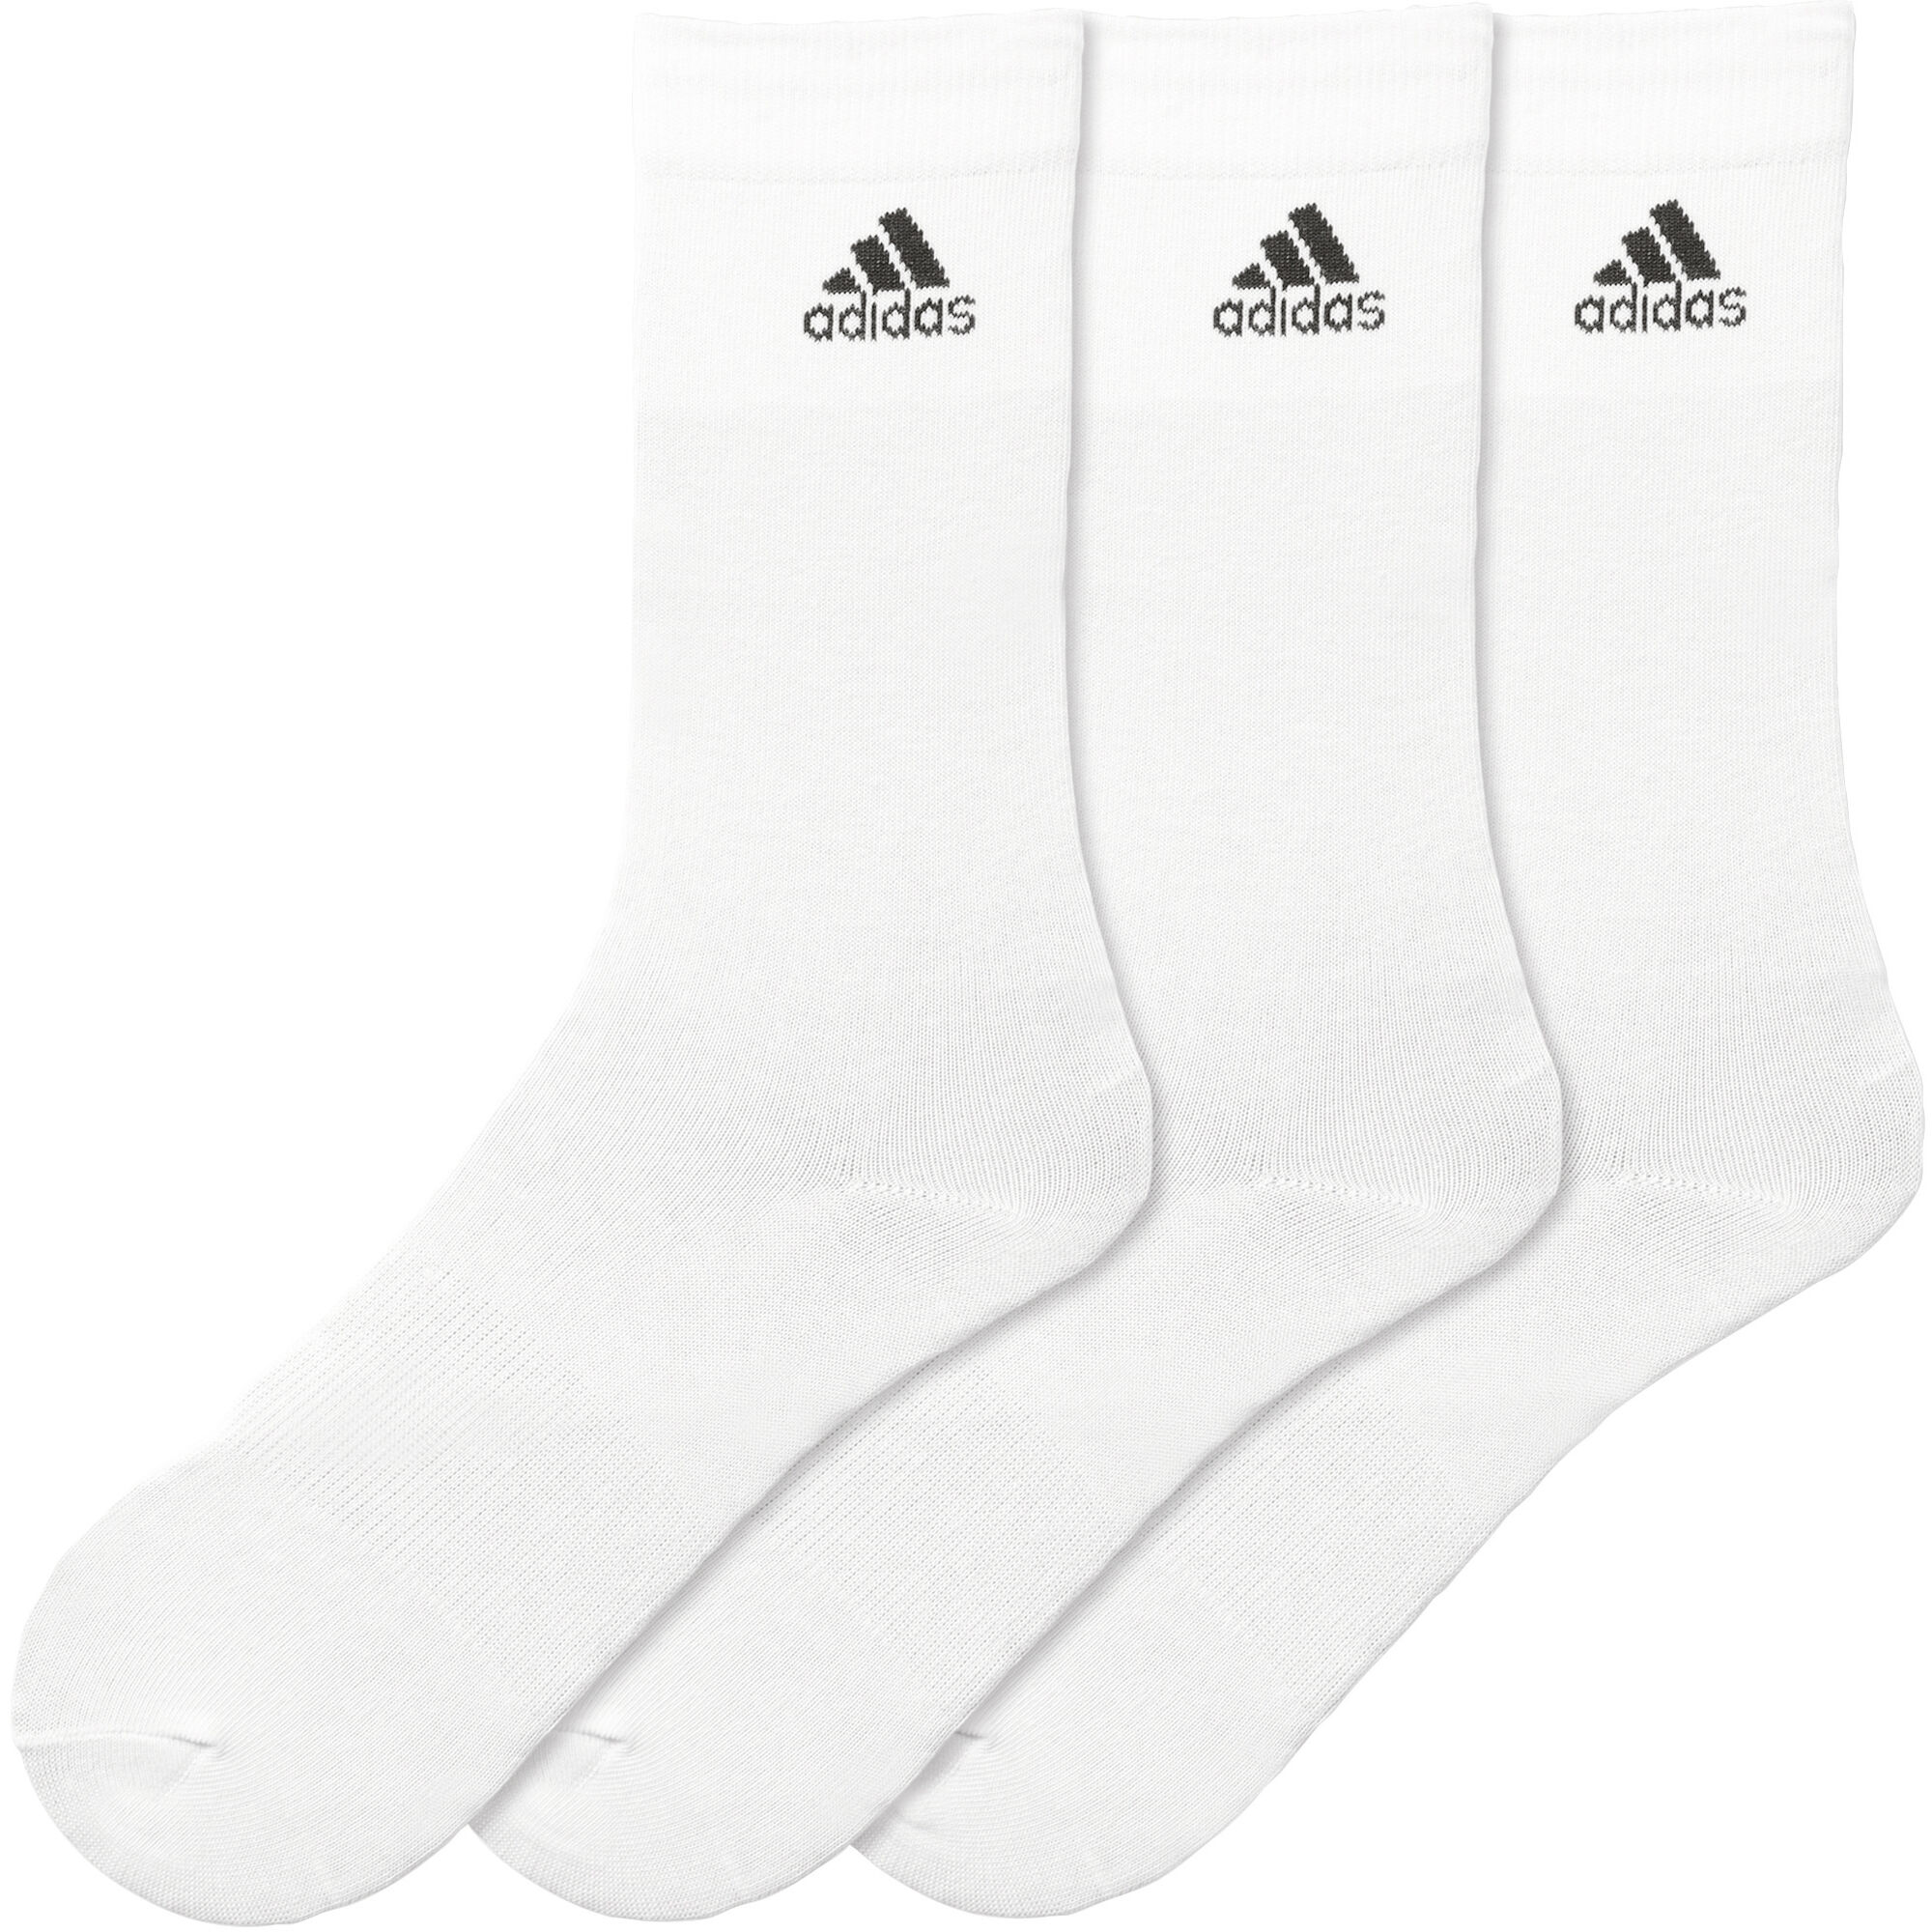 adidas Performance Crew Thin Calcetines Deporte Pack 3 - Blanco, Negro compra online | Tennis-Point